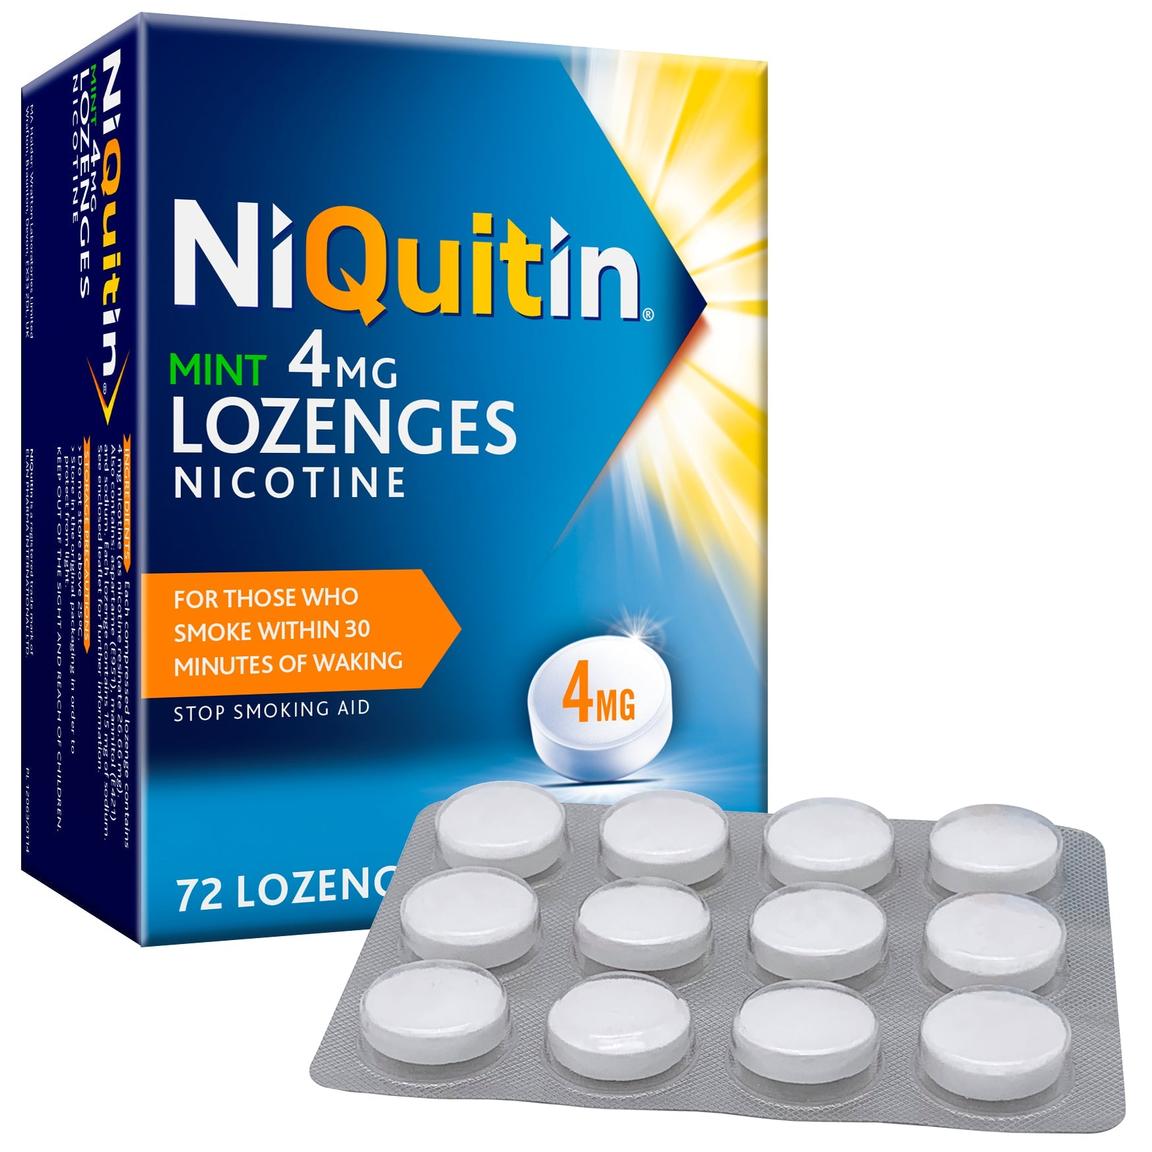 NiQuitin mint 4mg lozenges offers at £1099 in Lloyds Pharmacy